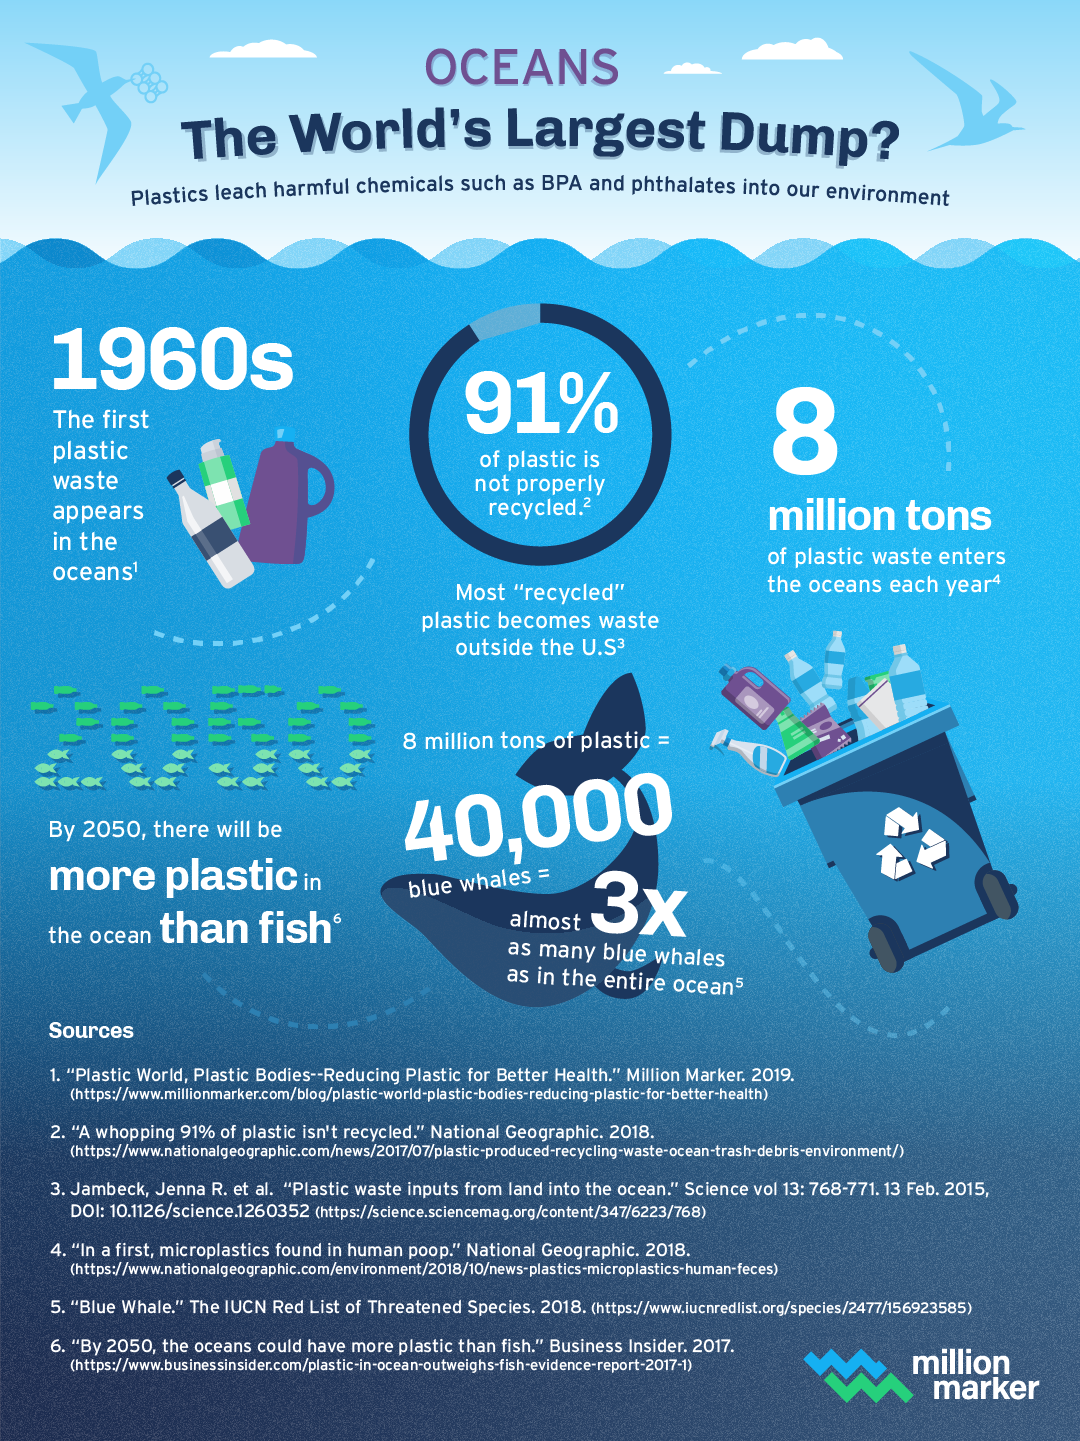 oceans-day-largest-dump-infographic.png